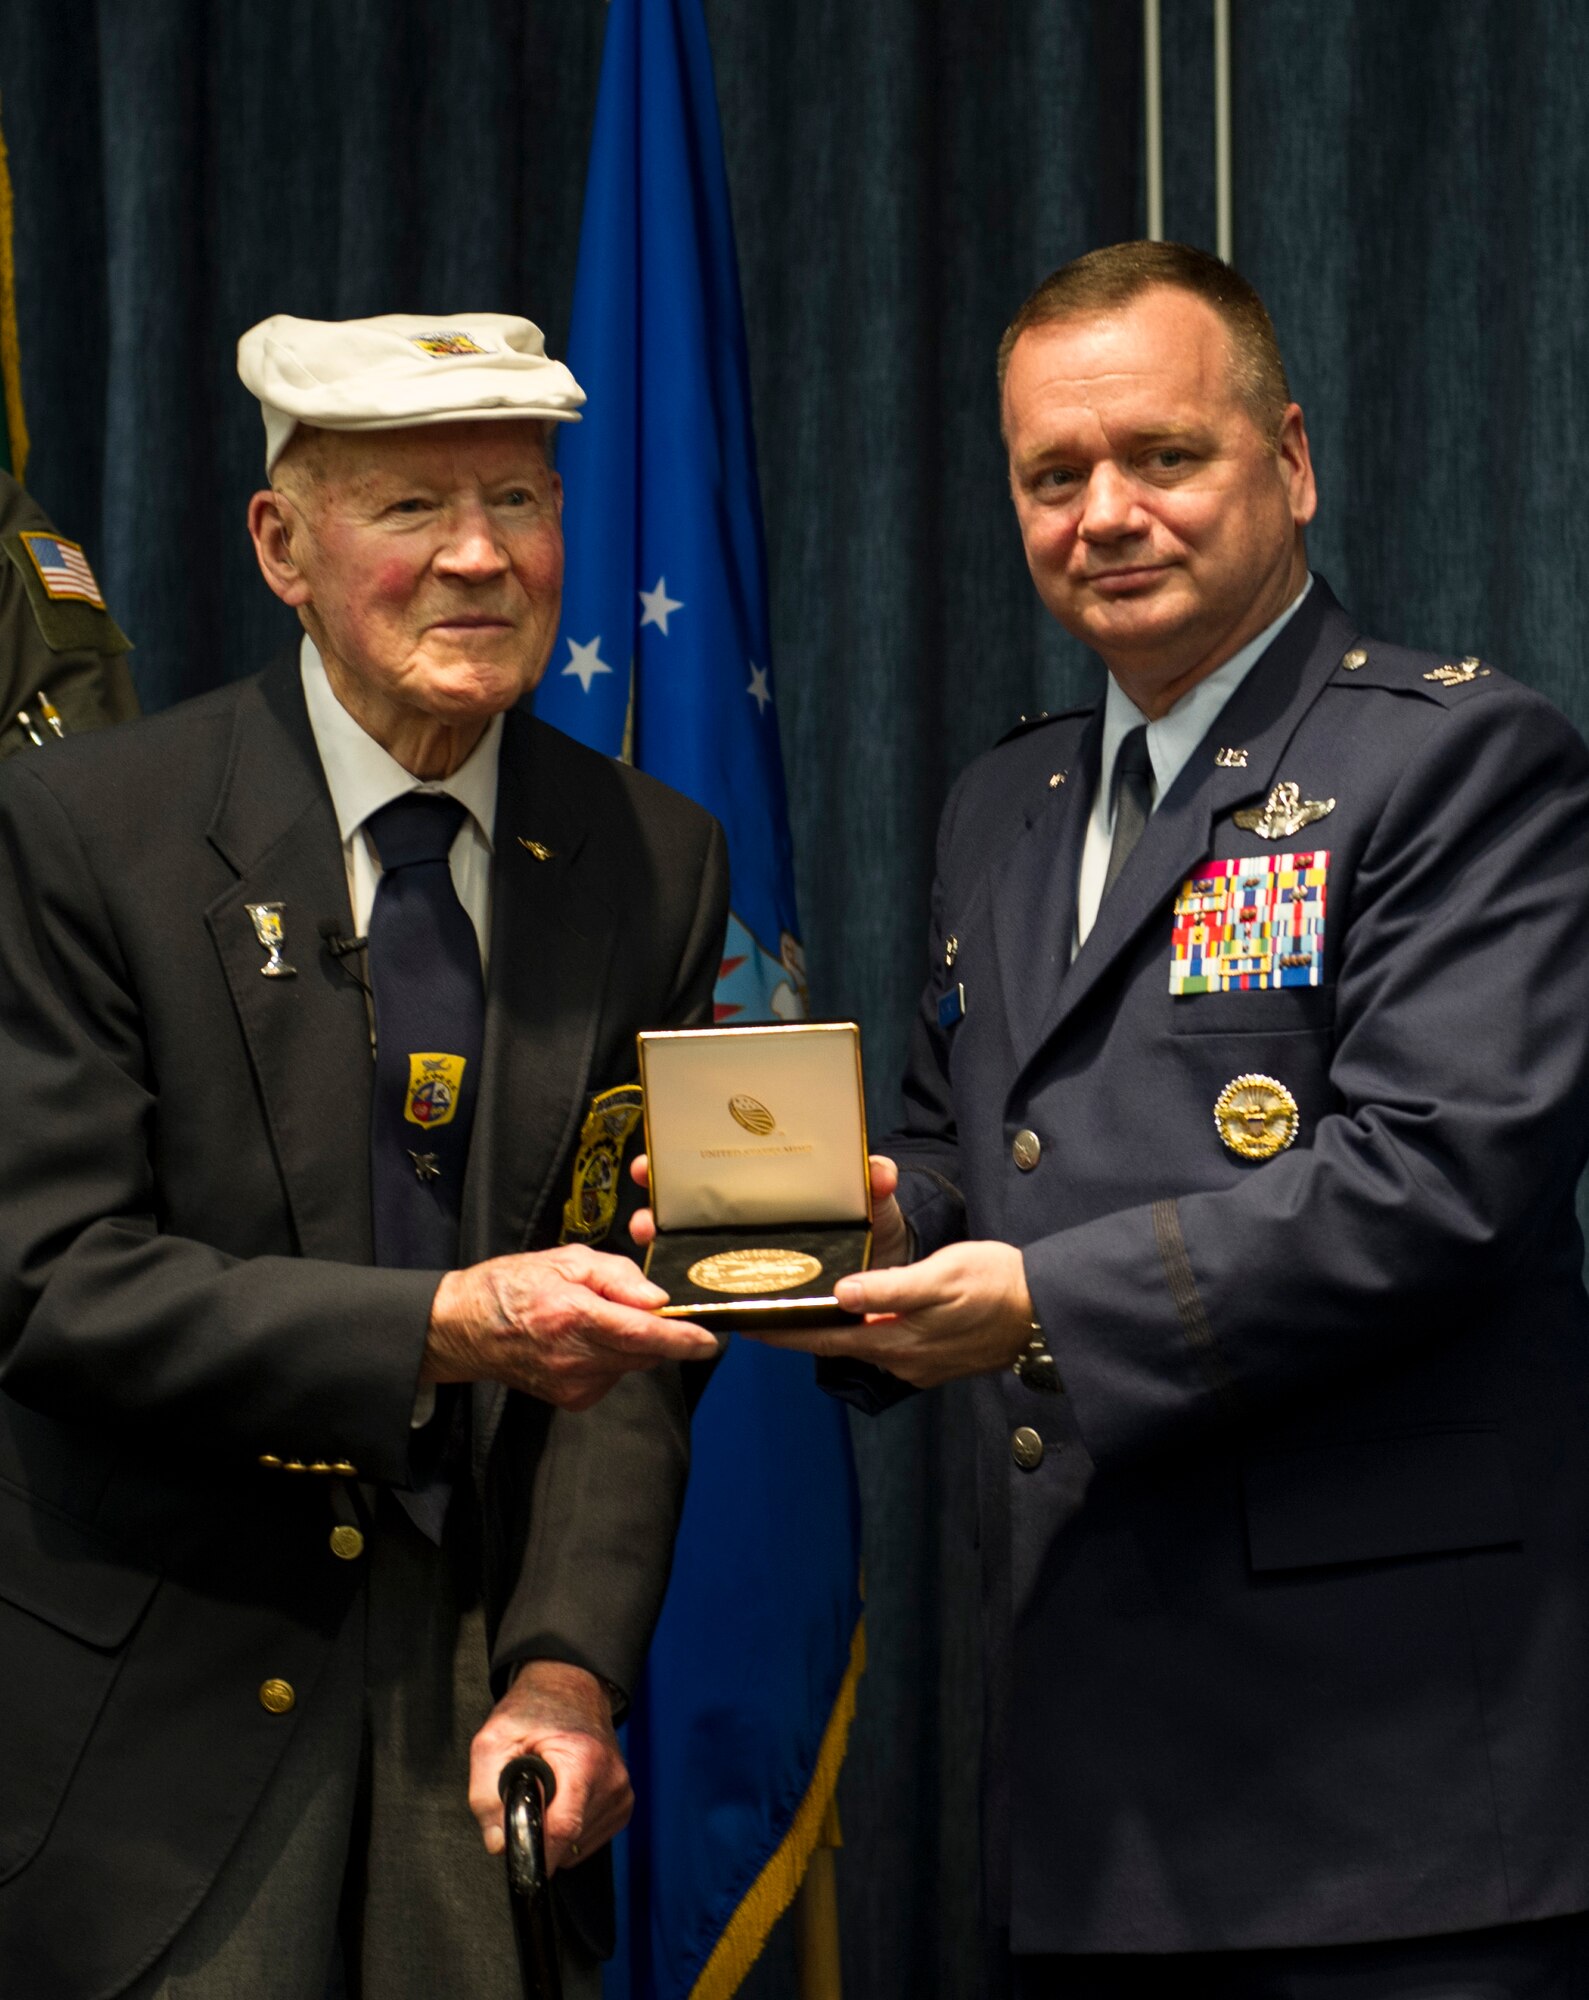 Former Staff Sgt. David Thatcher, one of two surviving Doolittle Raiders, presents Col. Brian McDaniel, the 92nd Air Refueling Wing commander, with a replica Congressional Gold Medal on April 18, 2016, at Fairchild Air Force Base, Wash. The Doolittle Raid was a pivotal point in World War II giving a morale boost to America and proving to the Japanese military that their home islands were not invincible. (U.S. Air Force photo/Airman 1st Class Sean Campbell)